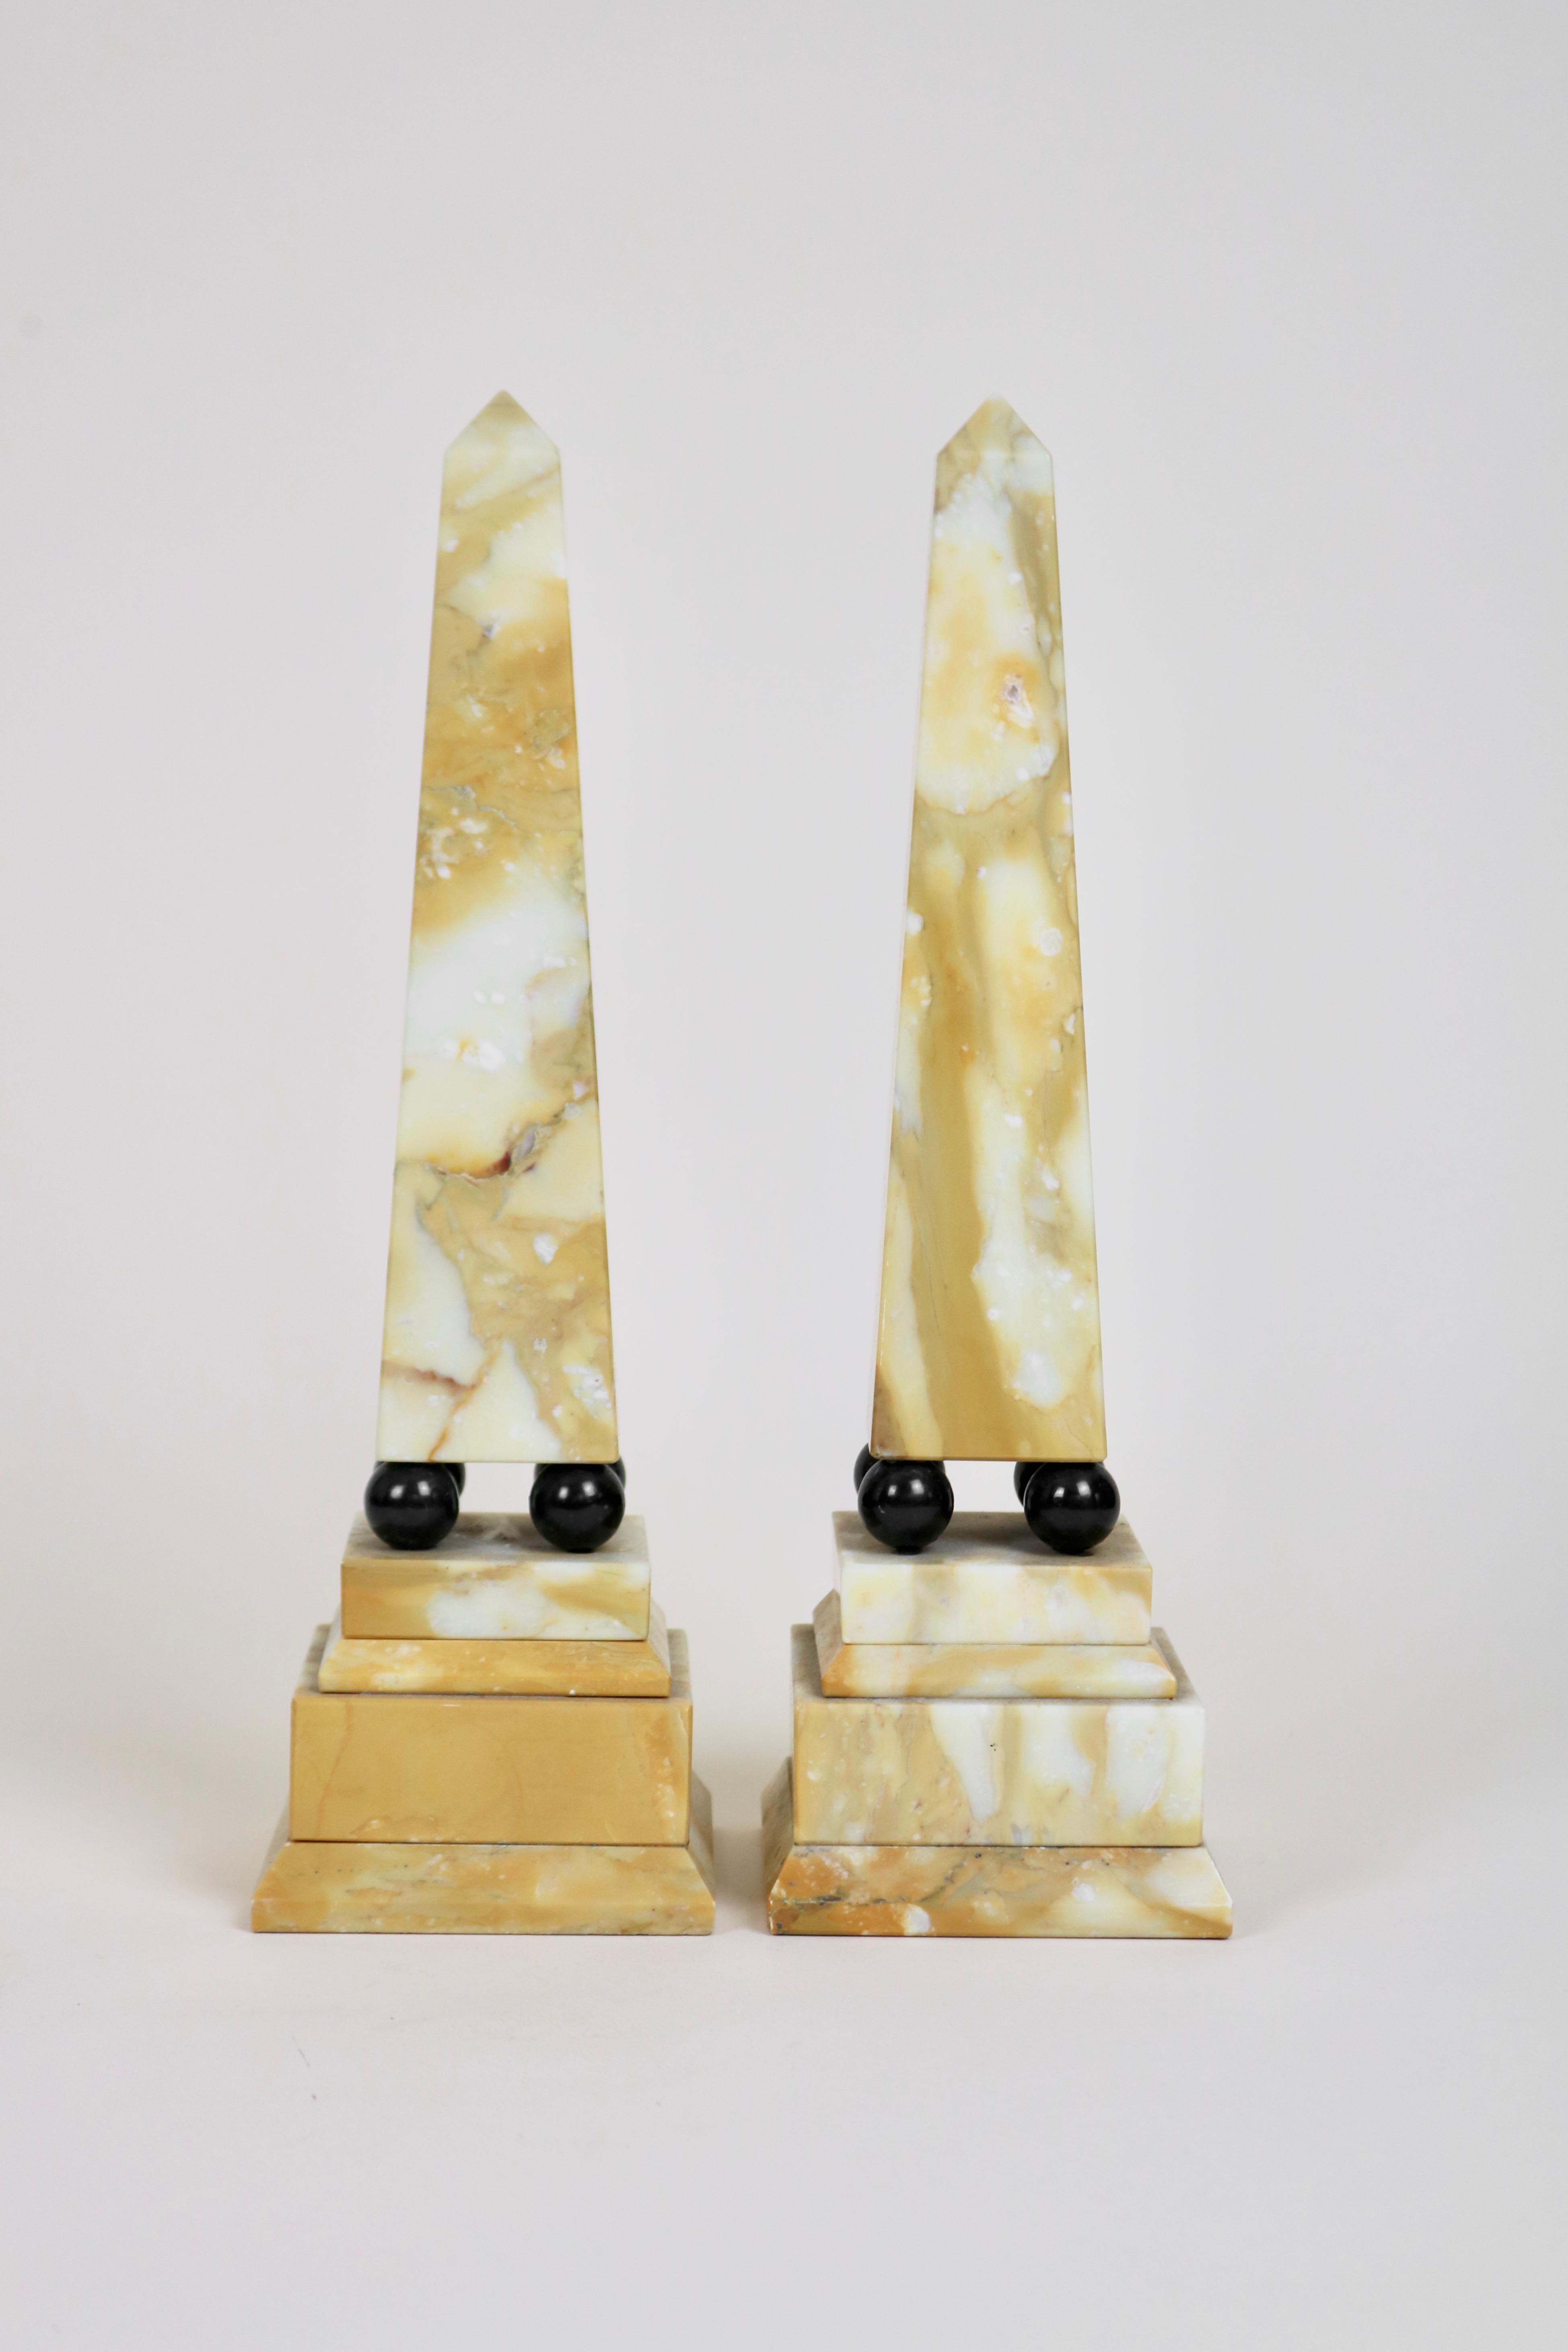 A pair of obelisks made from Siena marble with black marble ball detail. In the style of those collected on The Grand Tour.

Made in Italy in the first part of the 20th Century.

A couple of minor chips.